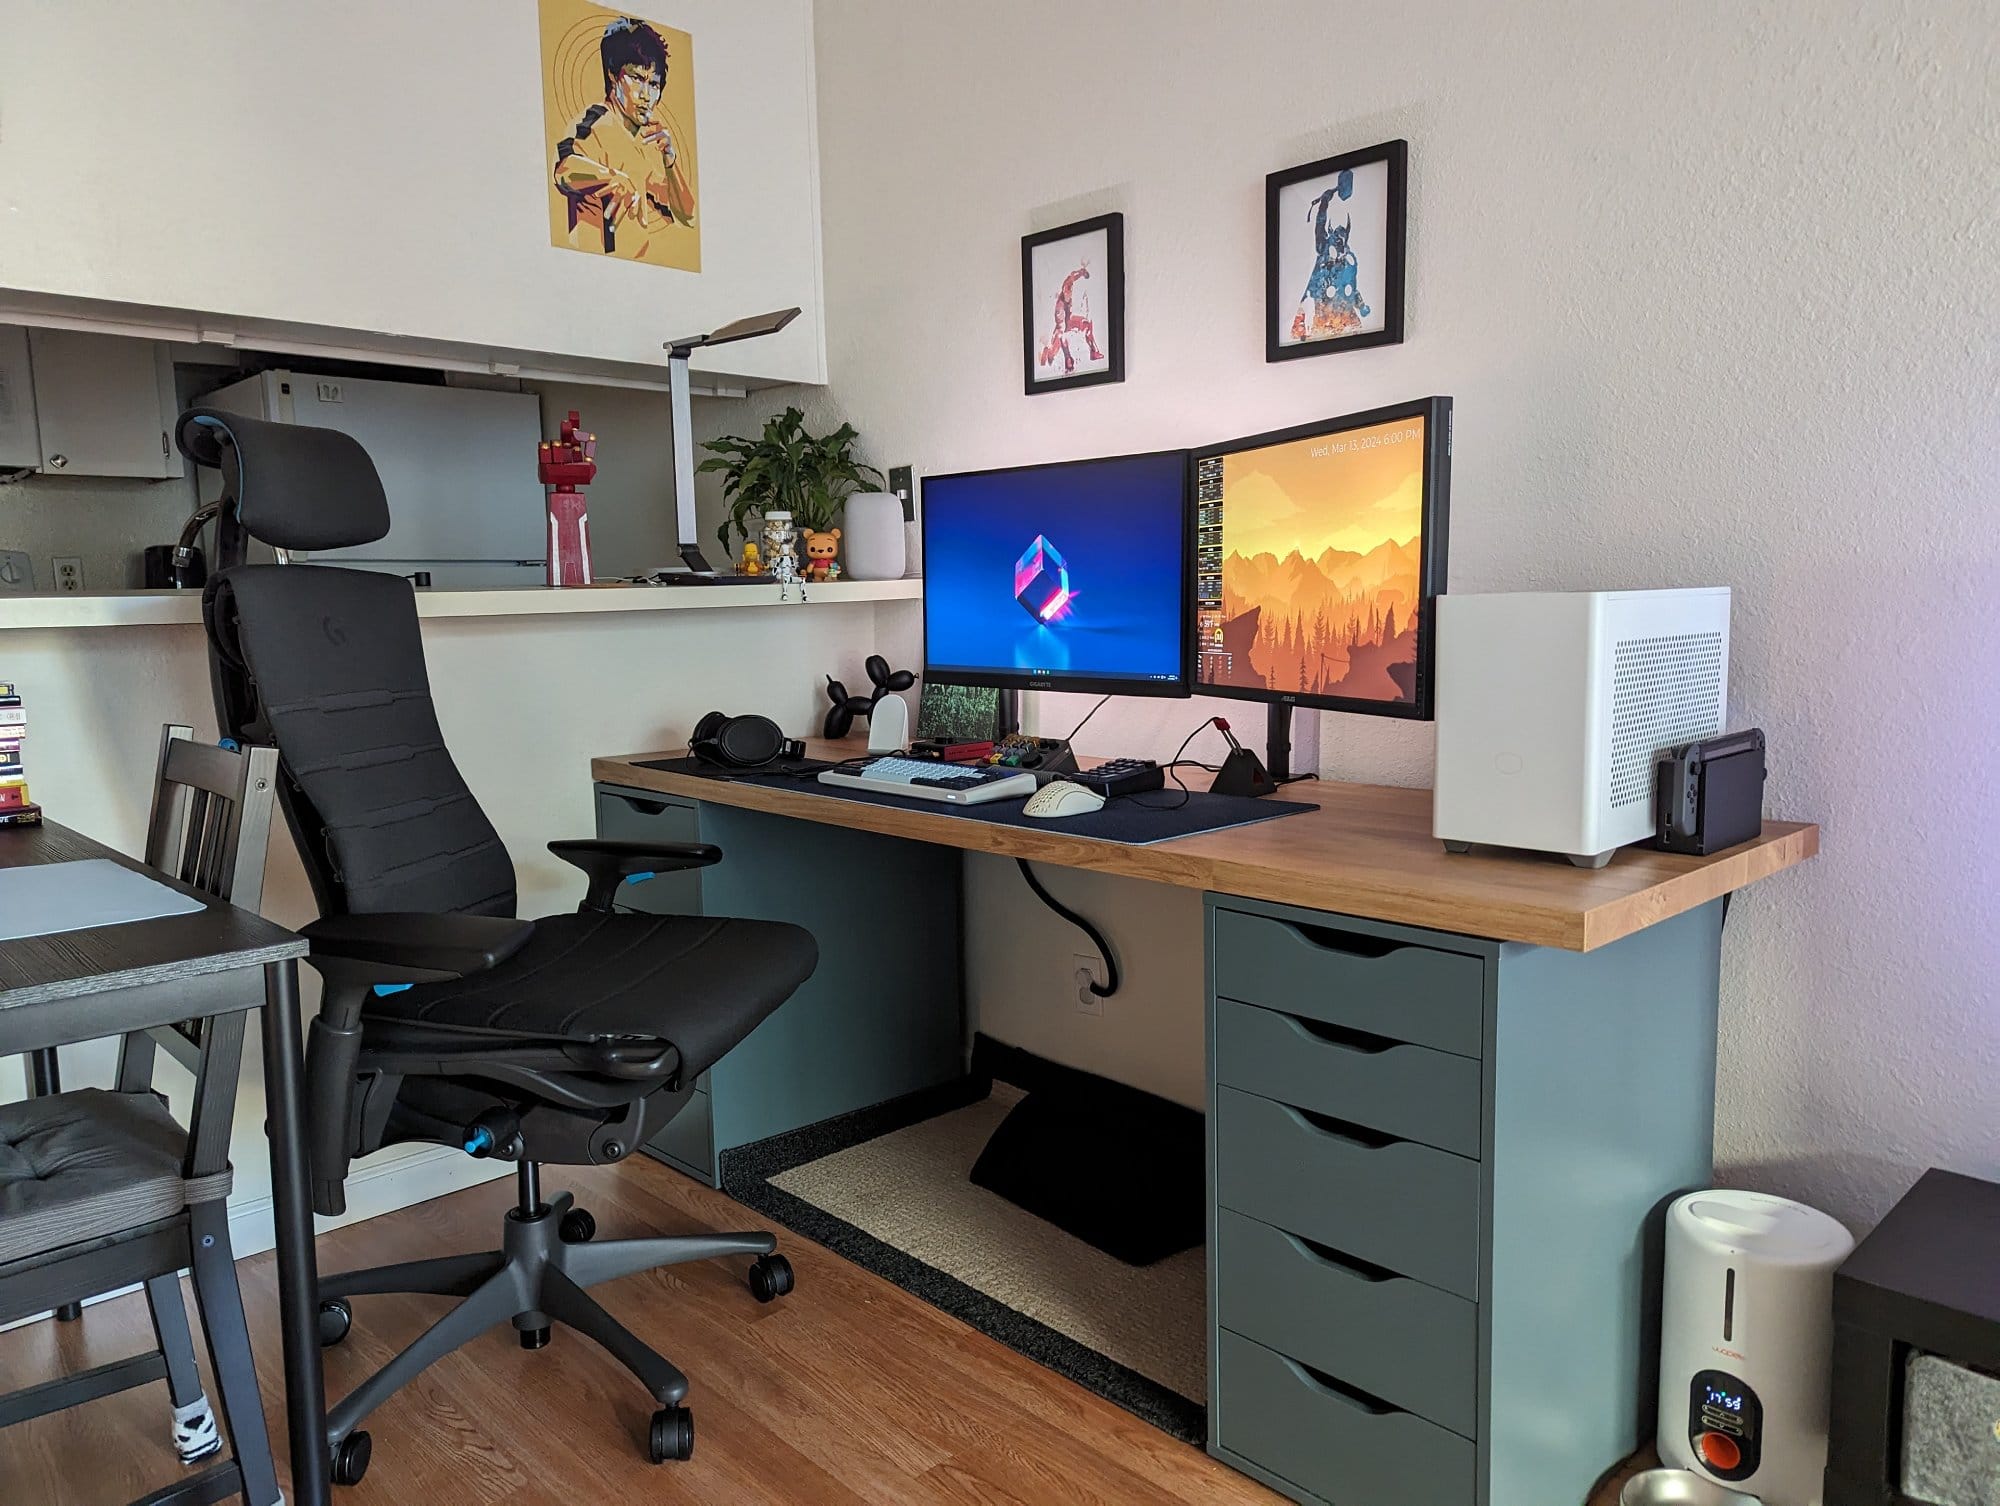 A well-organised workspace featuring an Embody chair, a desktop computer with dual monitors, and framed artwork on the wall